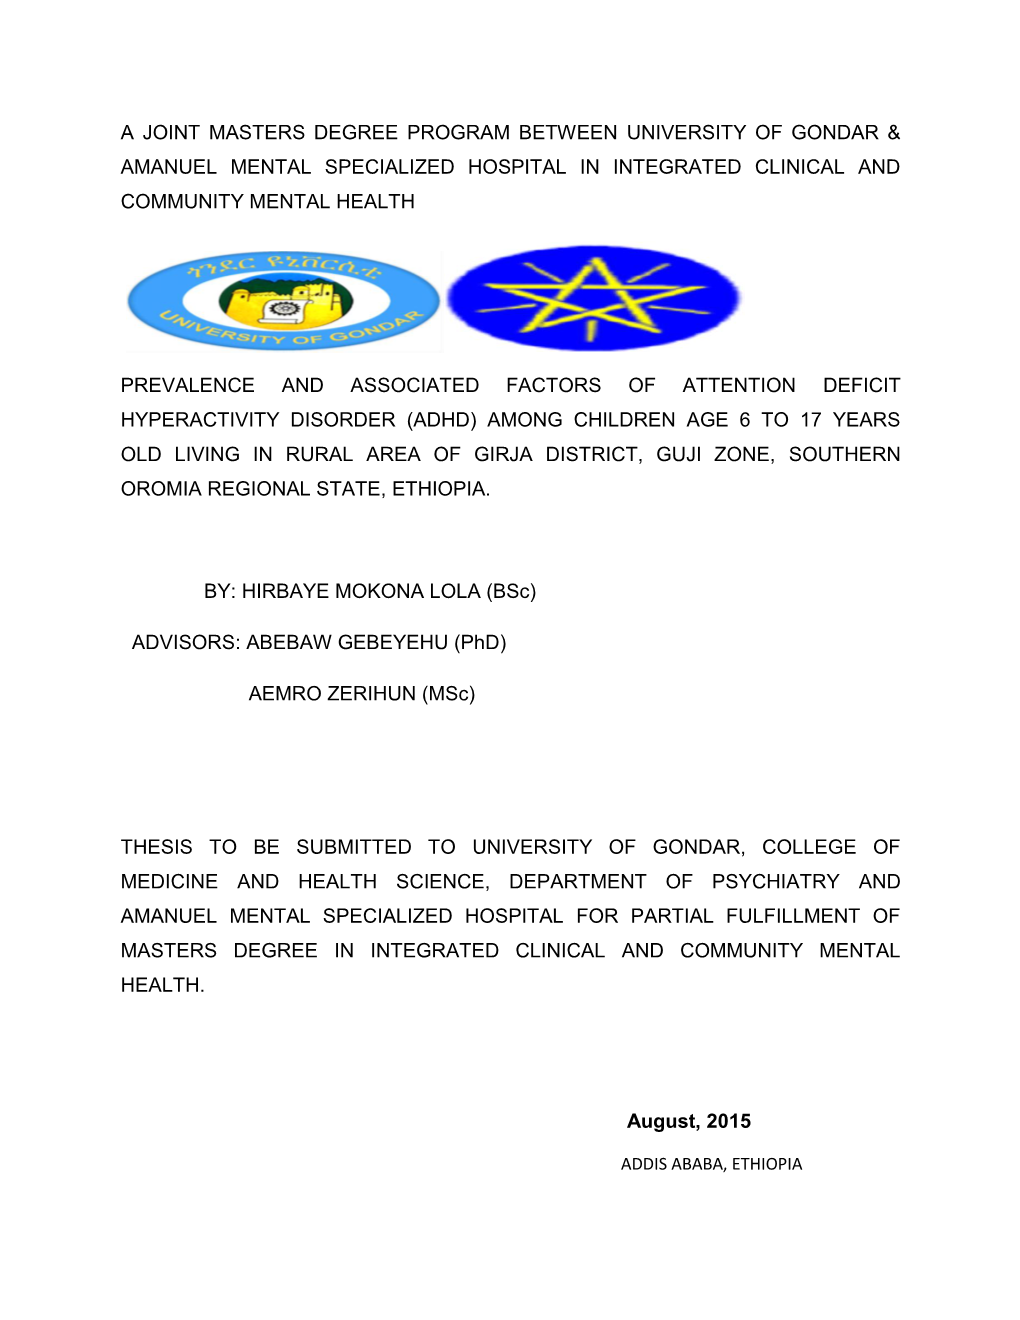 A Joint Masters Degree Program Between University of Gondar & Amanuel Mental Specialized Hospital in Integrated Clinical and Community Mental Health